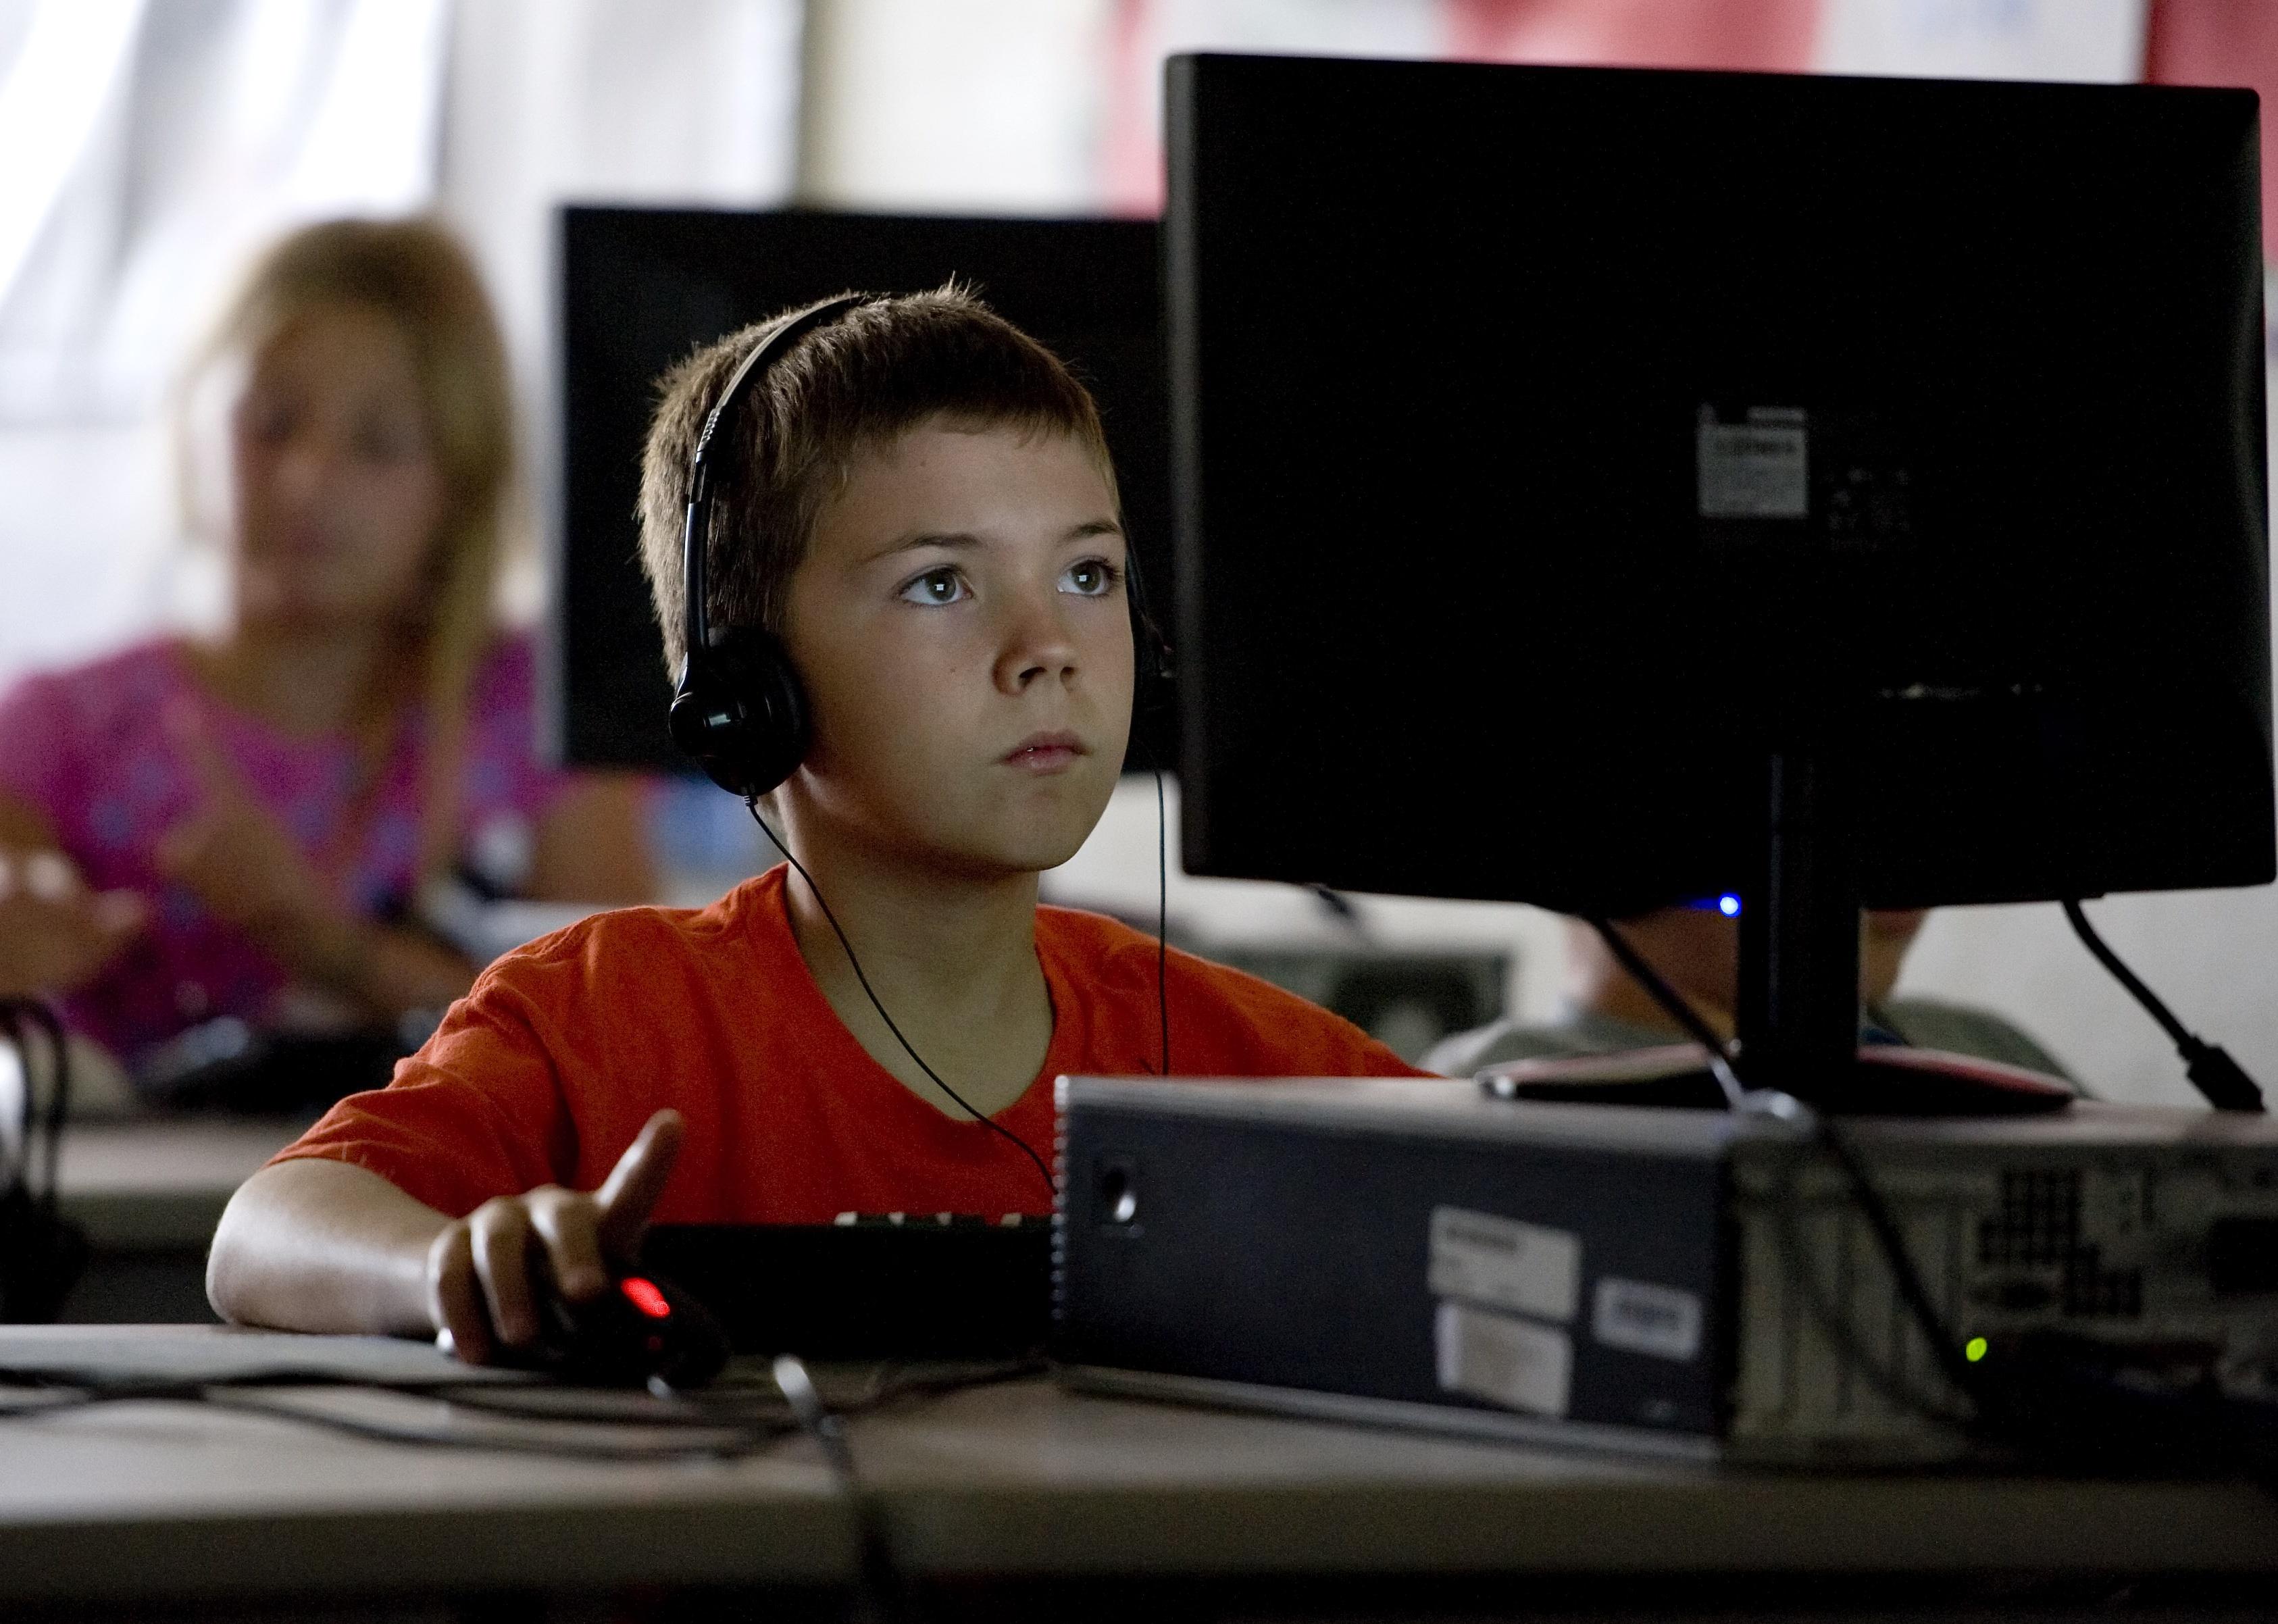 A third grade student sits at a computer working while wearing headphones.